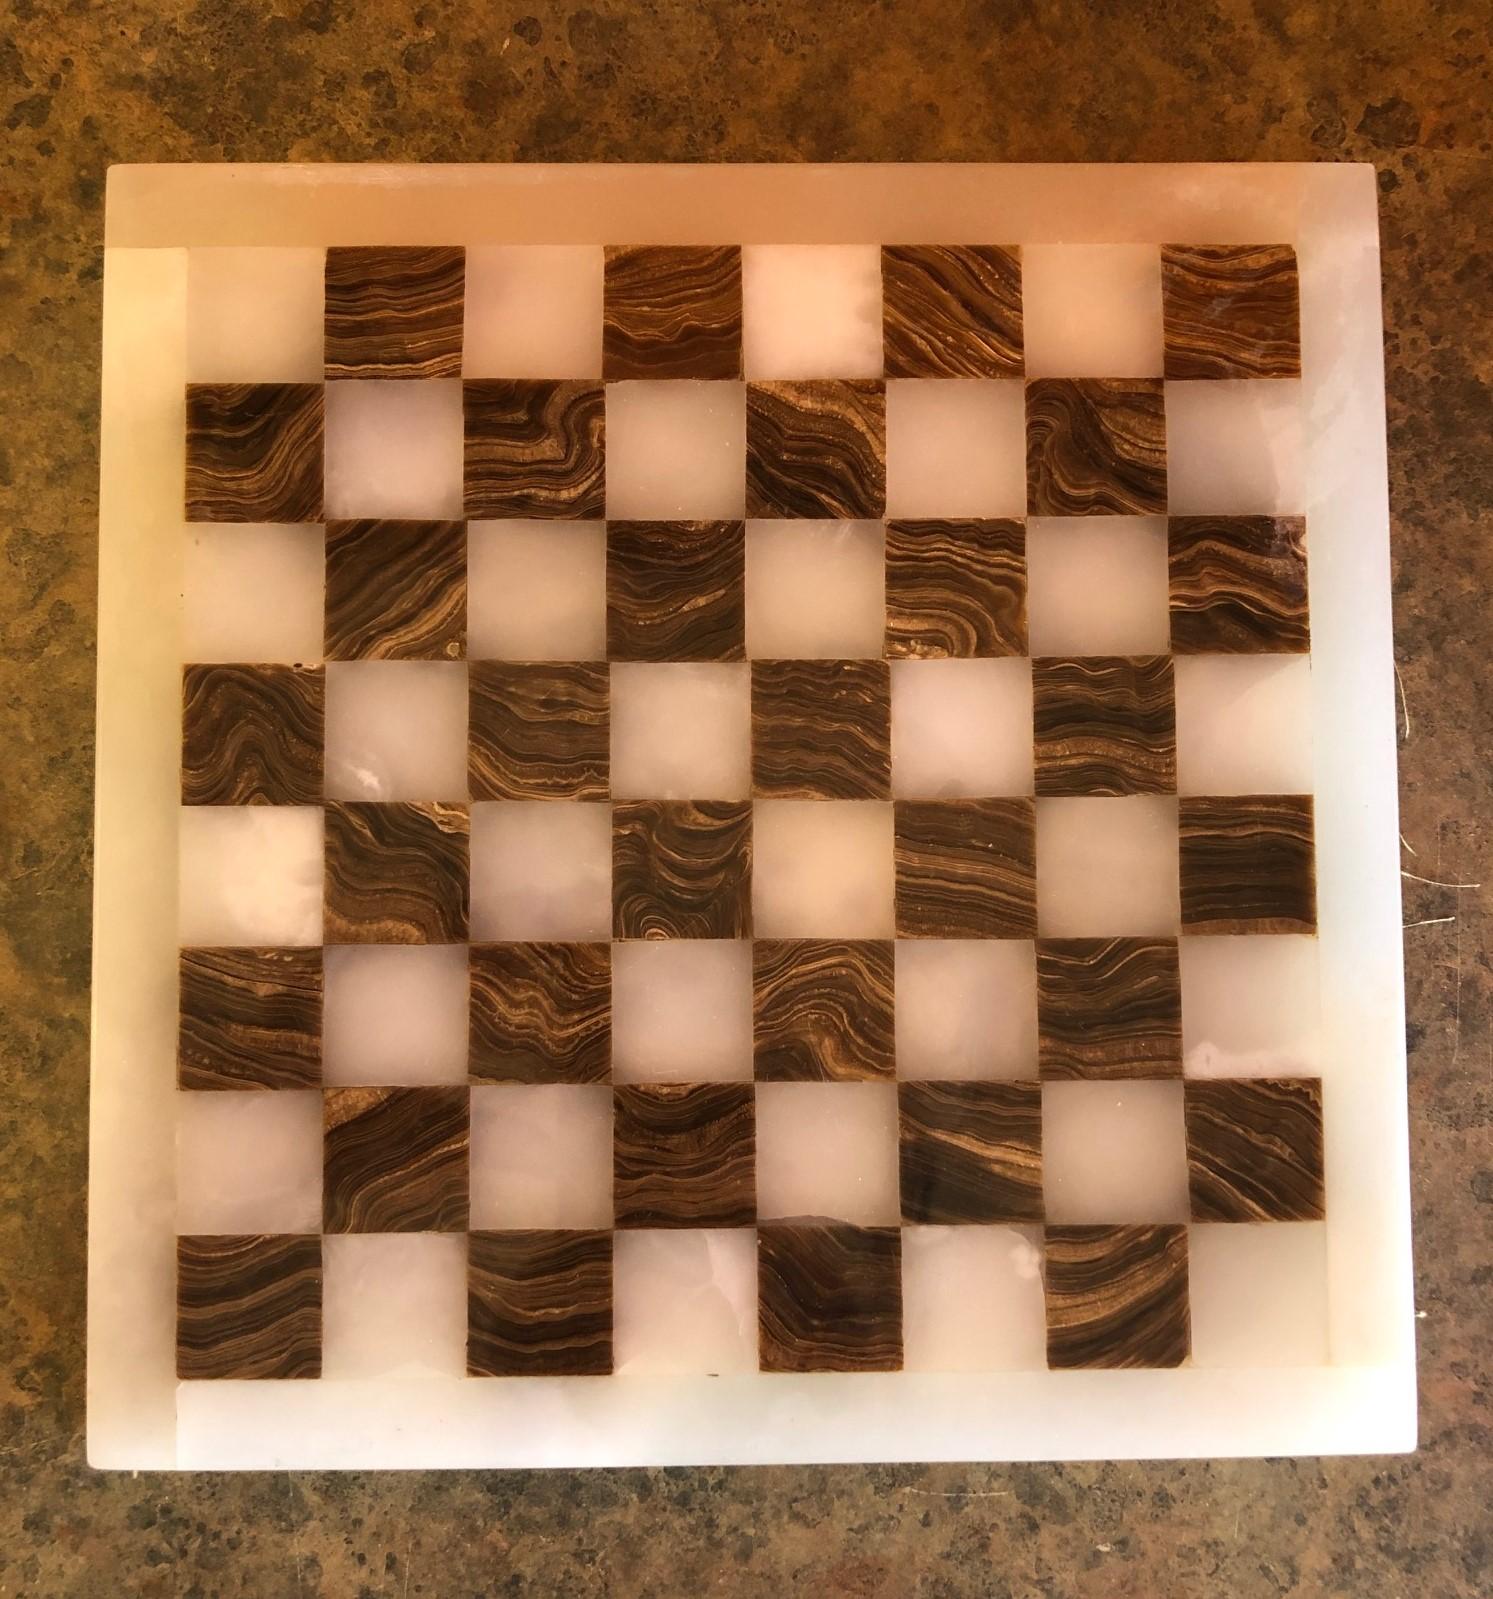 Midcentury white and brown onyx chess board, circa 1970s. The board is in very nice vintage condition with no chips or cracks and measures 11.25